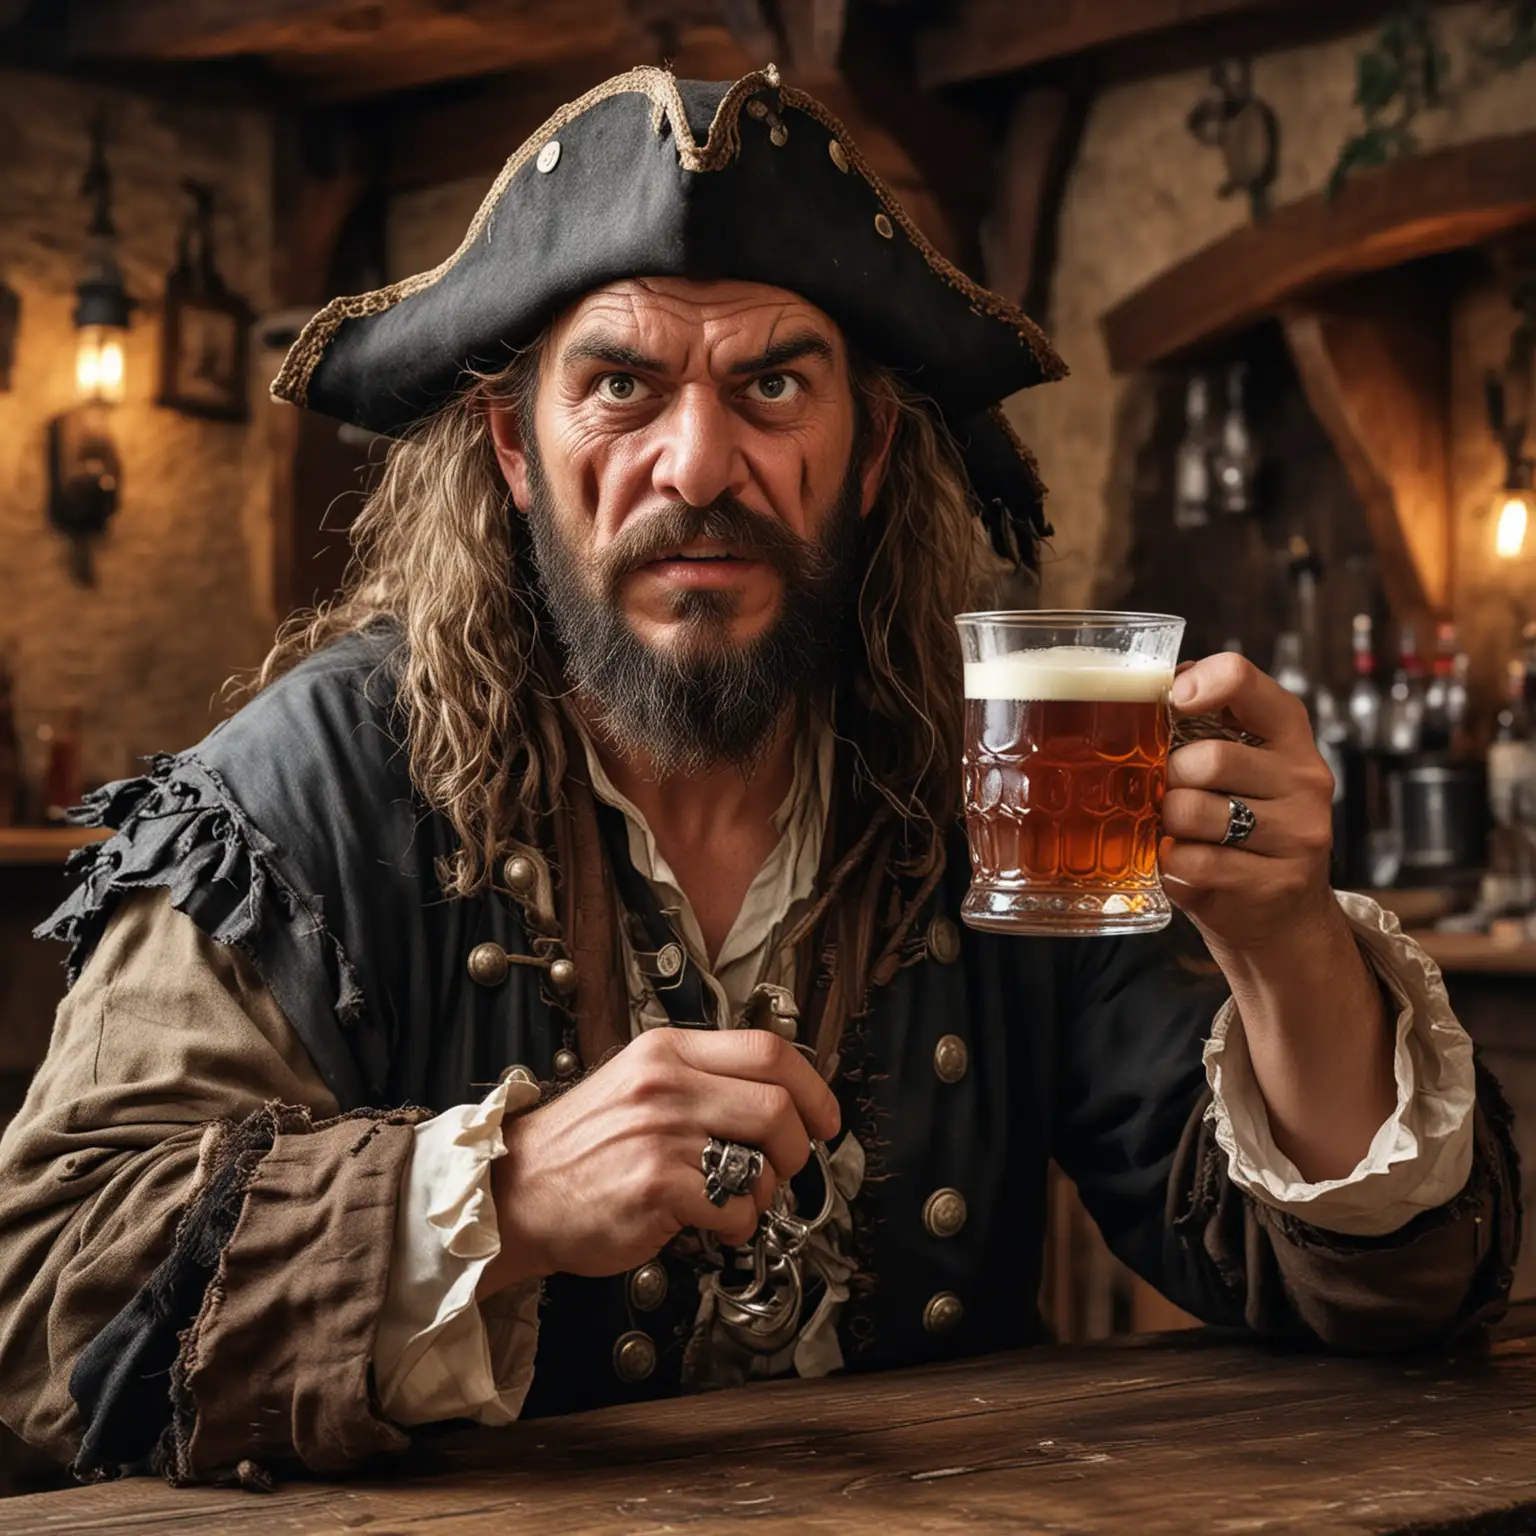 Gruff Pirate in Medieval Tavern Holding Cup